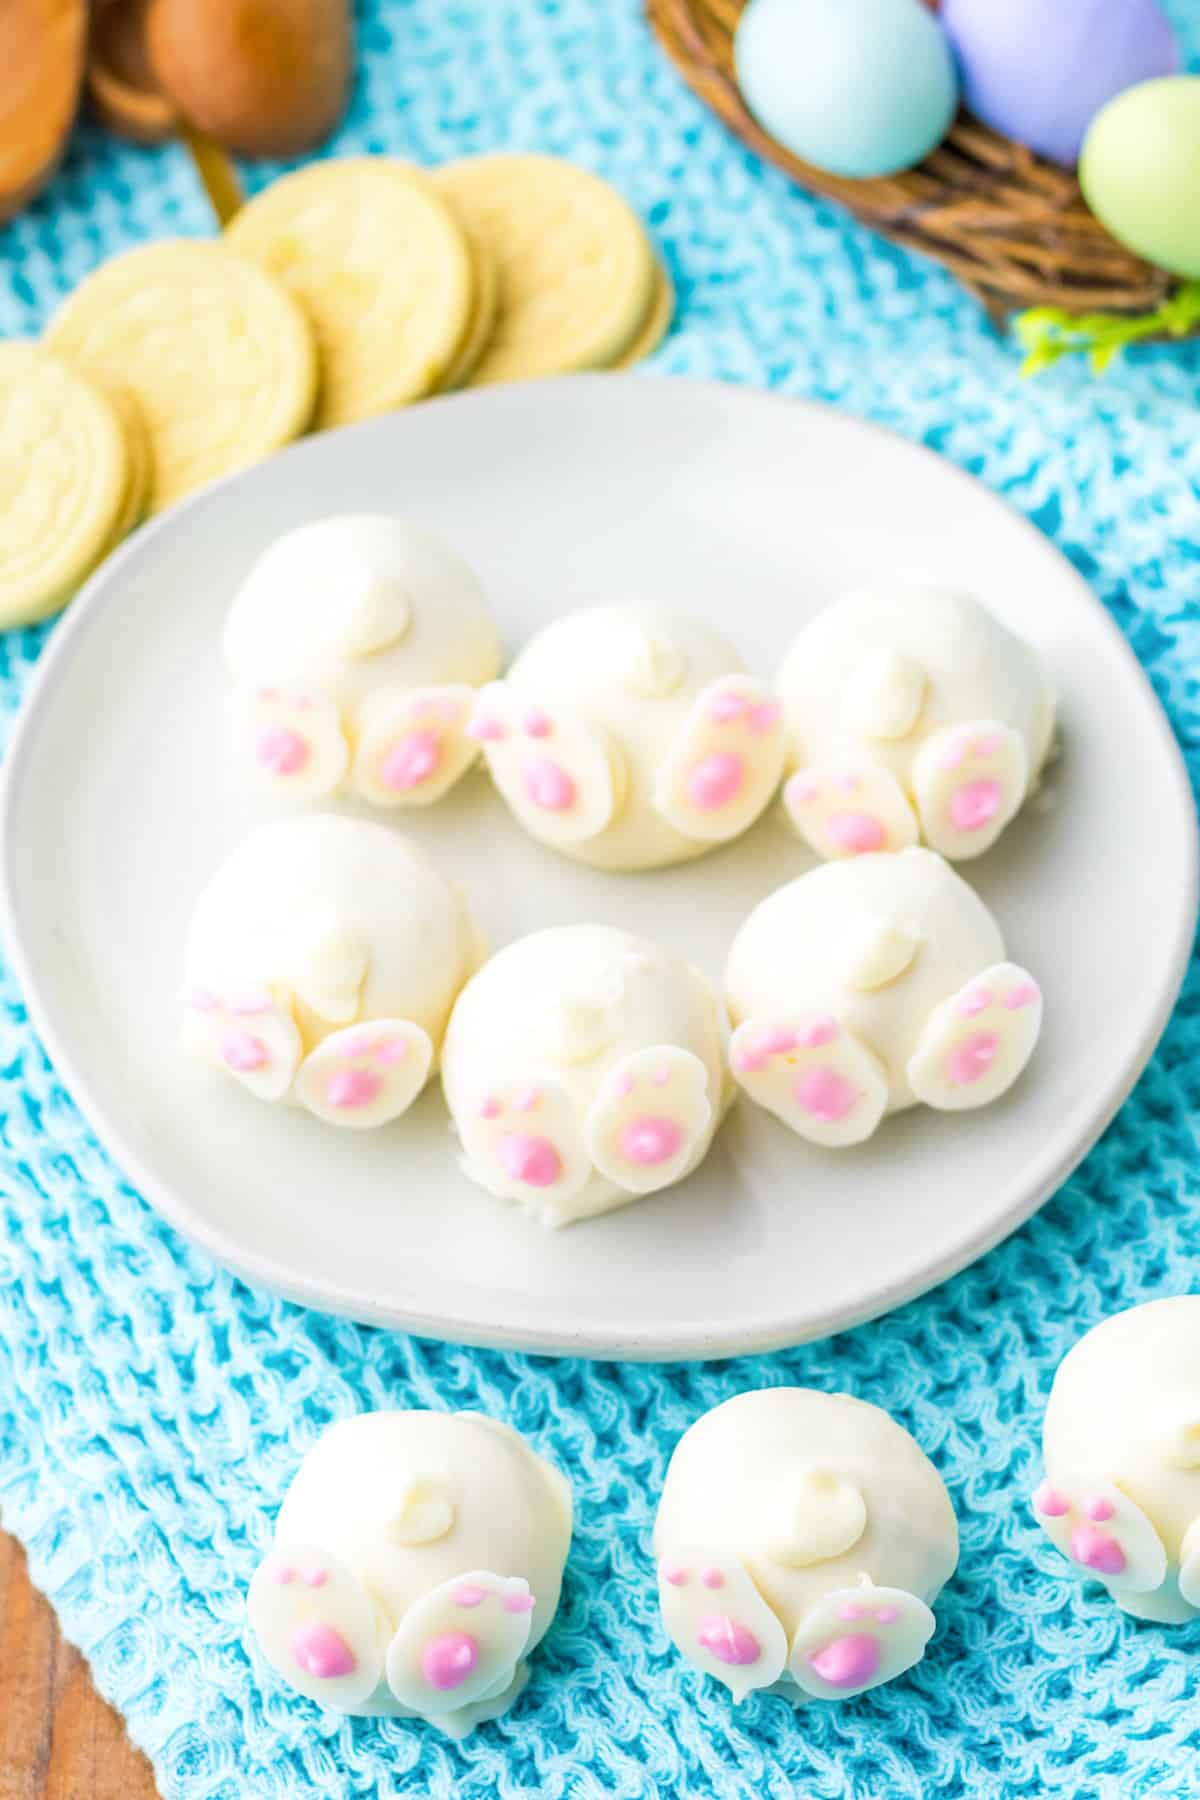 Overhead view of bunny truffles coated with white chocolate and decorated with candy feet and tails. Lemon cookies and easter decorations are surrounding them.